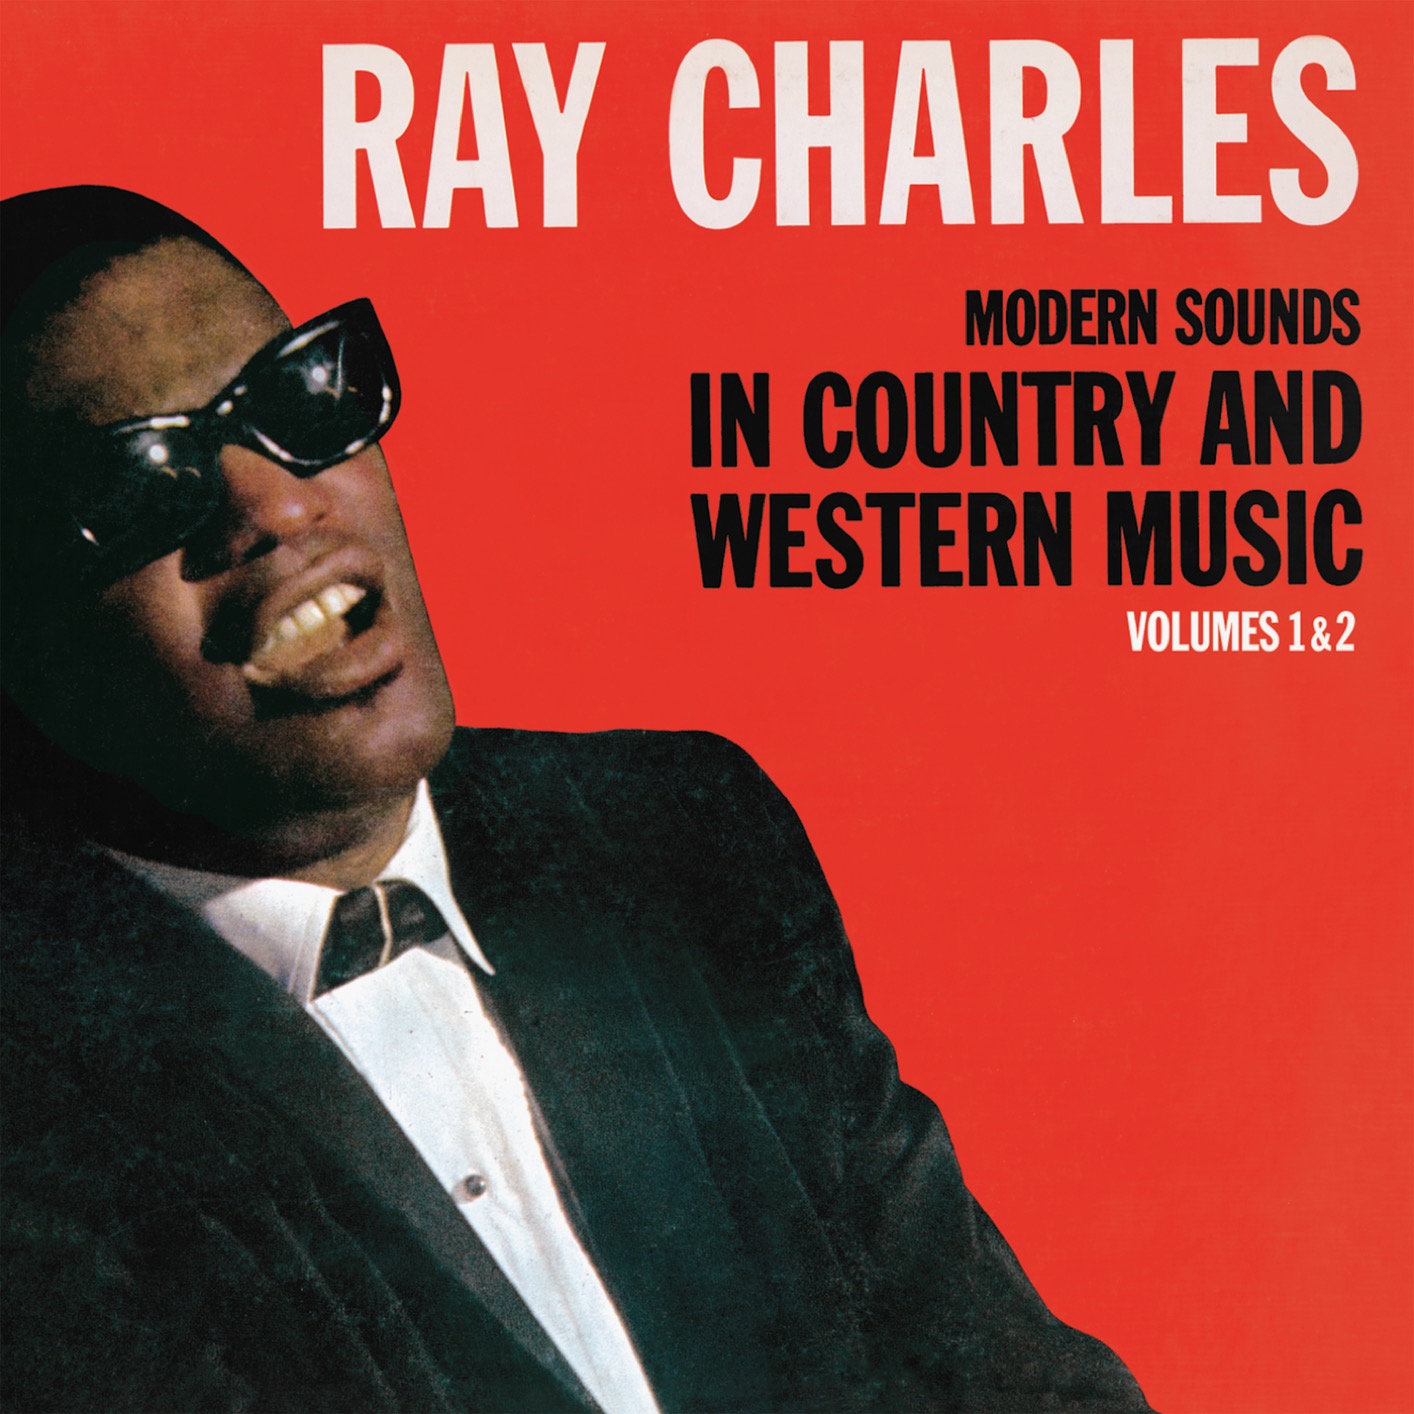 Ray Charles - Modern Sounds In Country And Western Music, Vols 1 & 2 (Remastered) (2009/2019) [FLAC 24bit/96kHz]